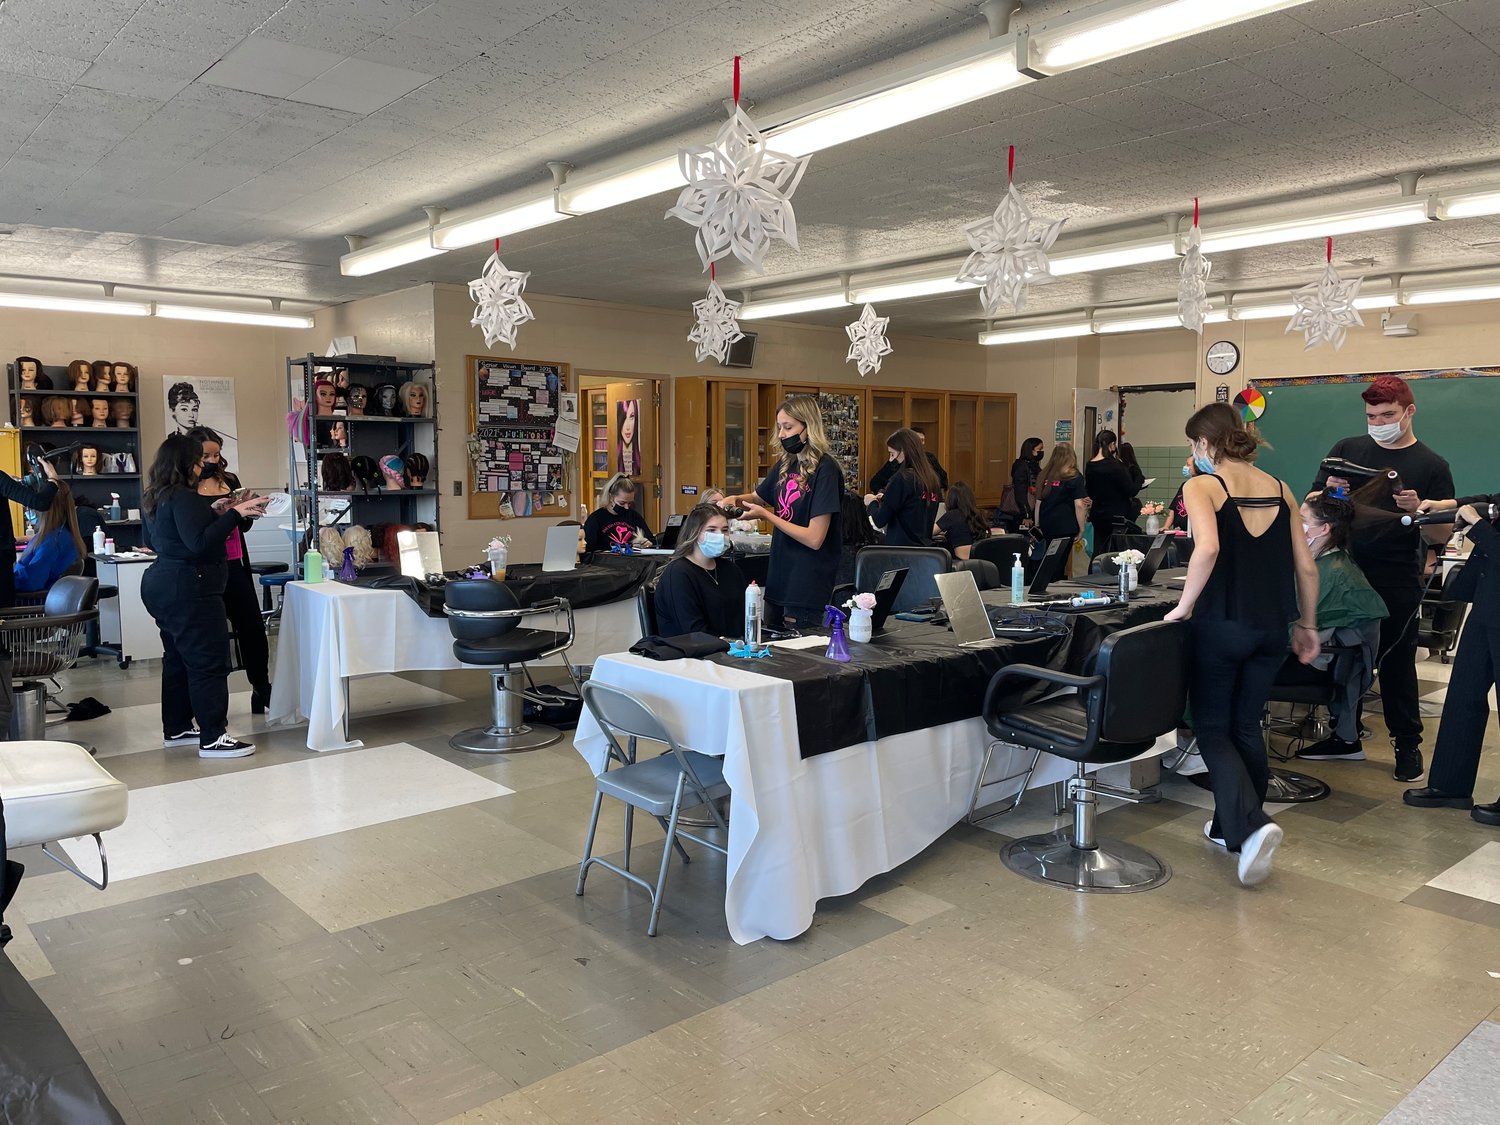 At Sanford H. Calhoun High School, Bellmore-Merrick juniors and seniors were hard at work during the district’s first cosmetology showcase last Friday.